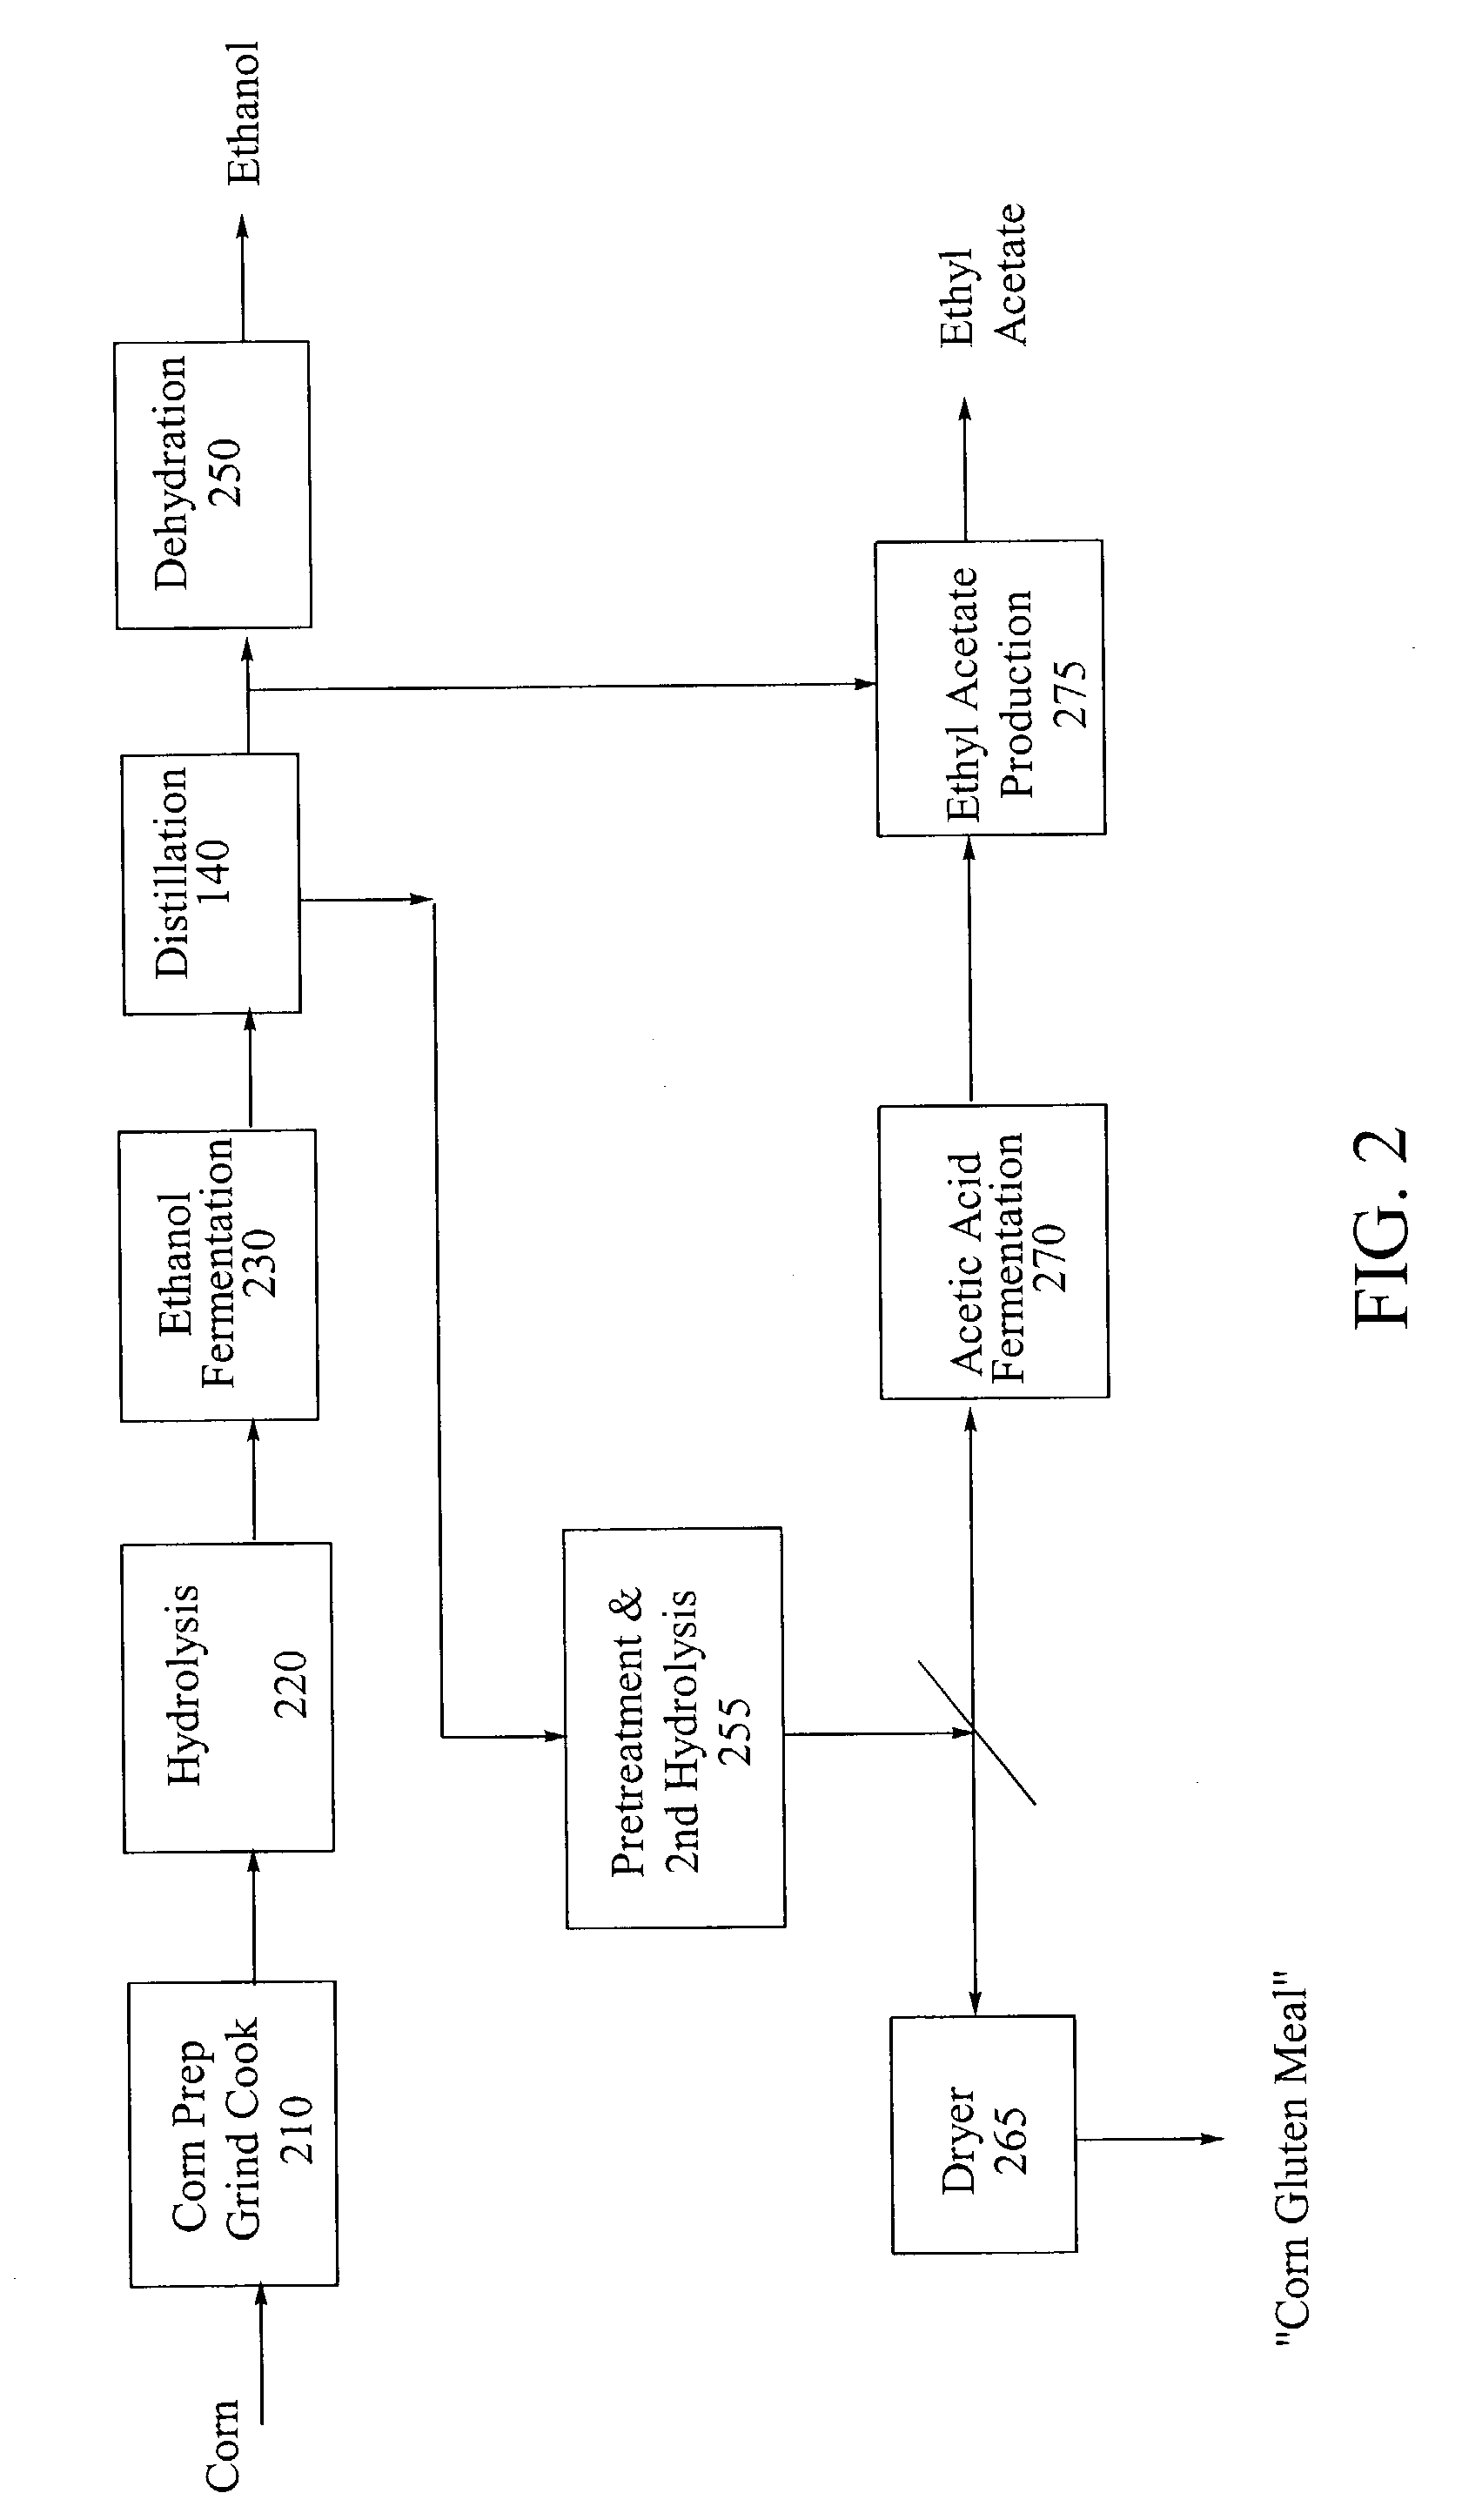 Process for producing ethanol from corn dry milling